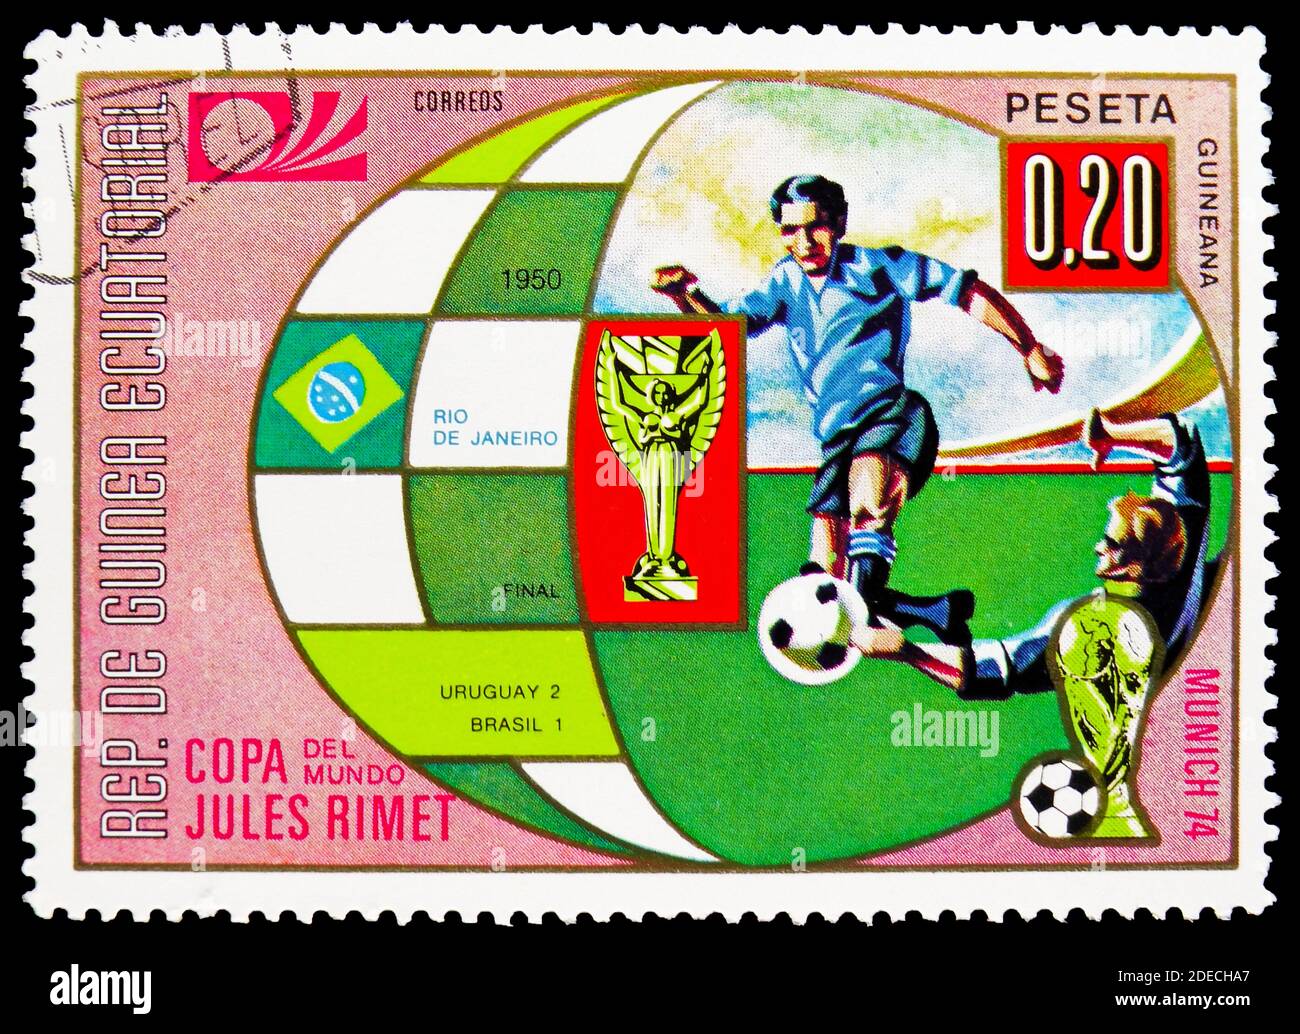 MOSCOW, RUSSIA - OCTOBER 17, 2020: Postage stamp printed in Equatorial Guinea shows Rio de Janeiro, Football World Cup 1974, Germany: Earlier World Cu Stock Photo